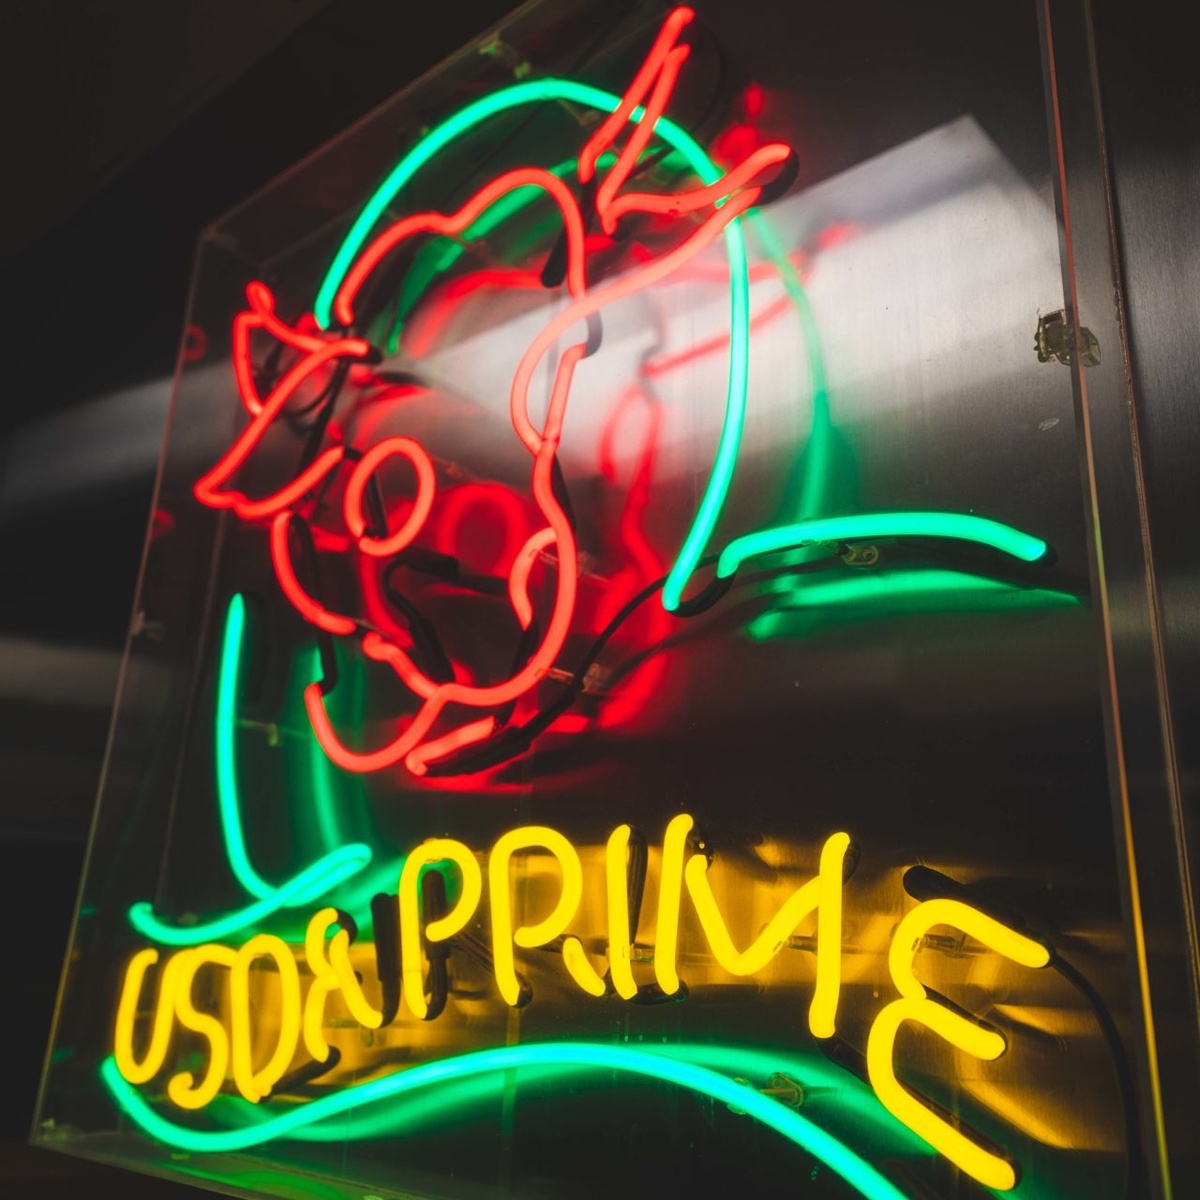 Neon sign for U.S.D.A. prime beef at 801 Chophouse.